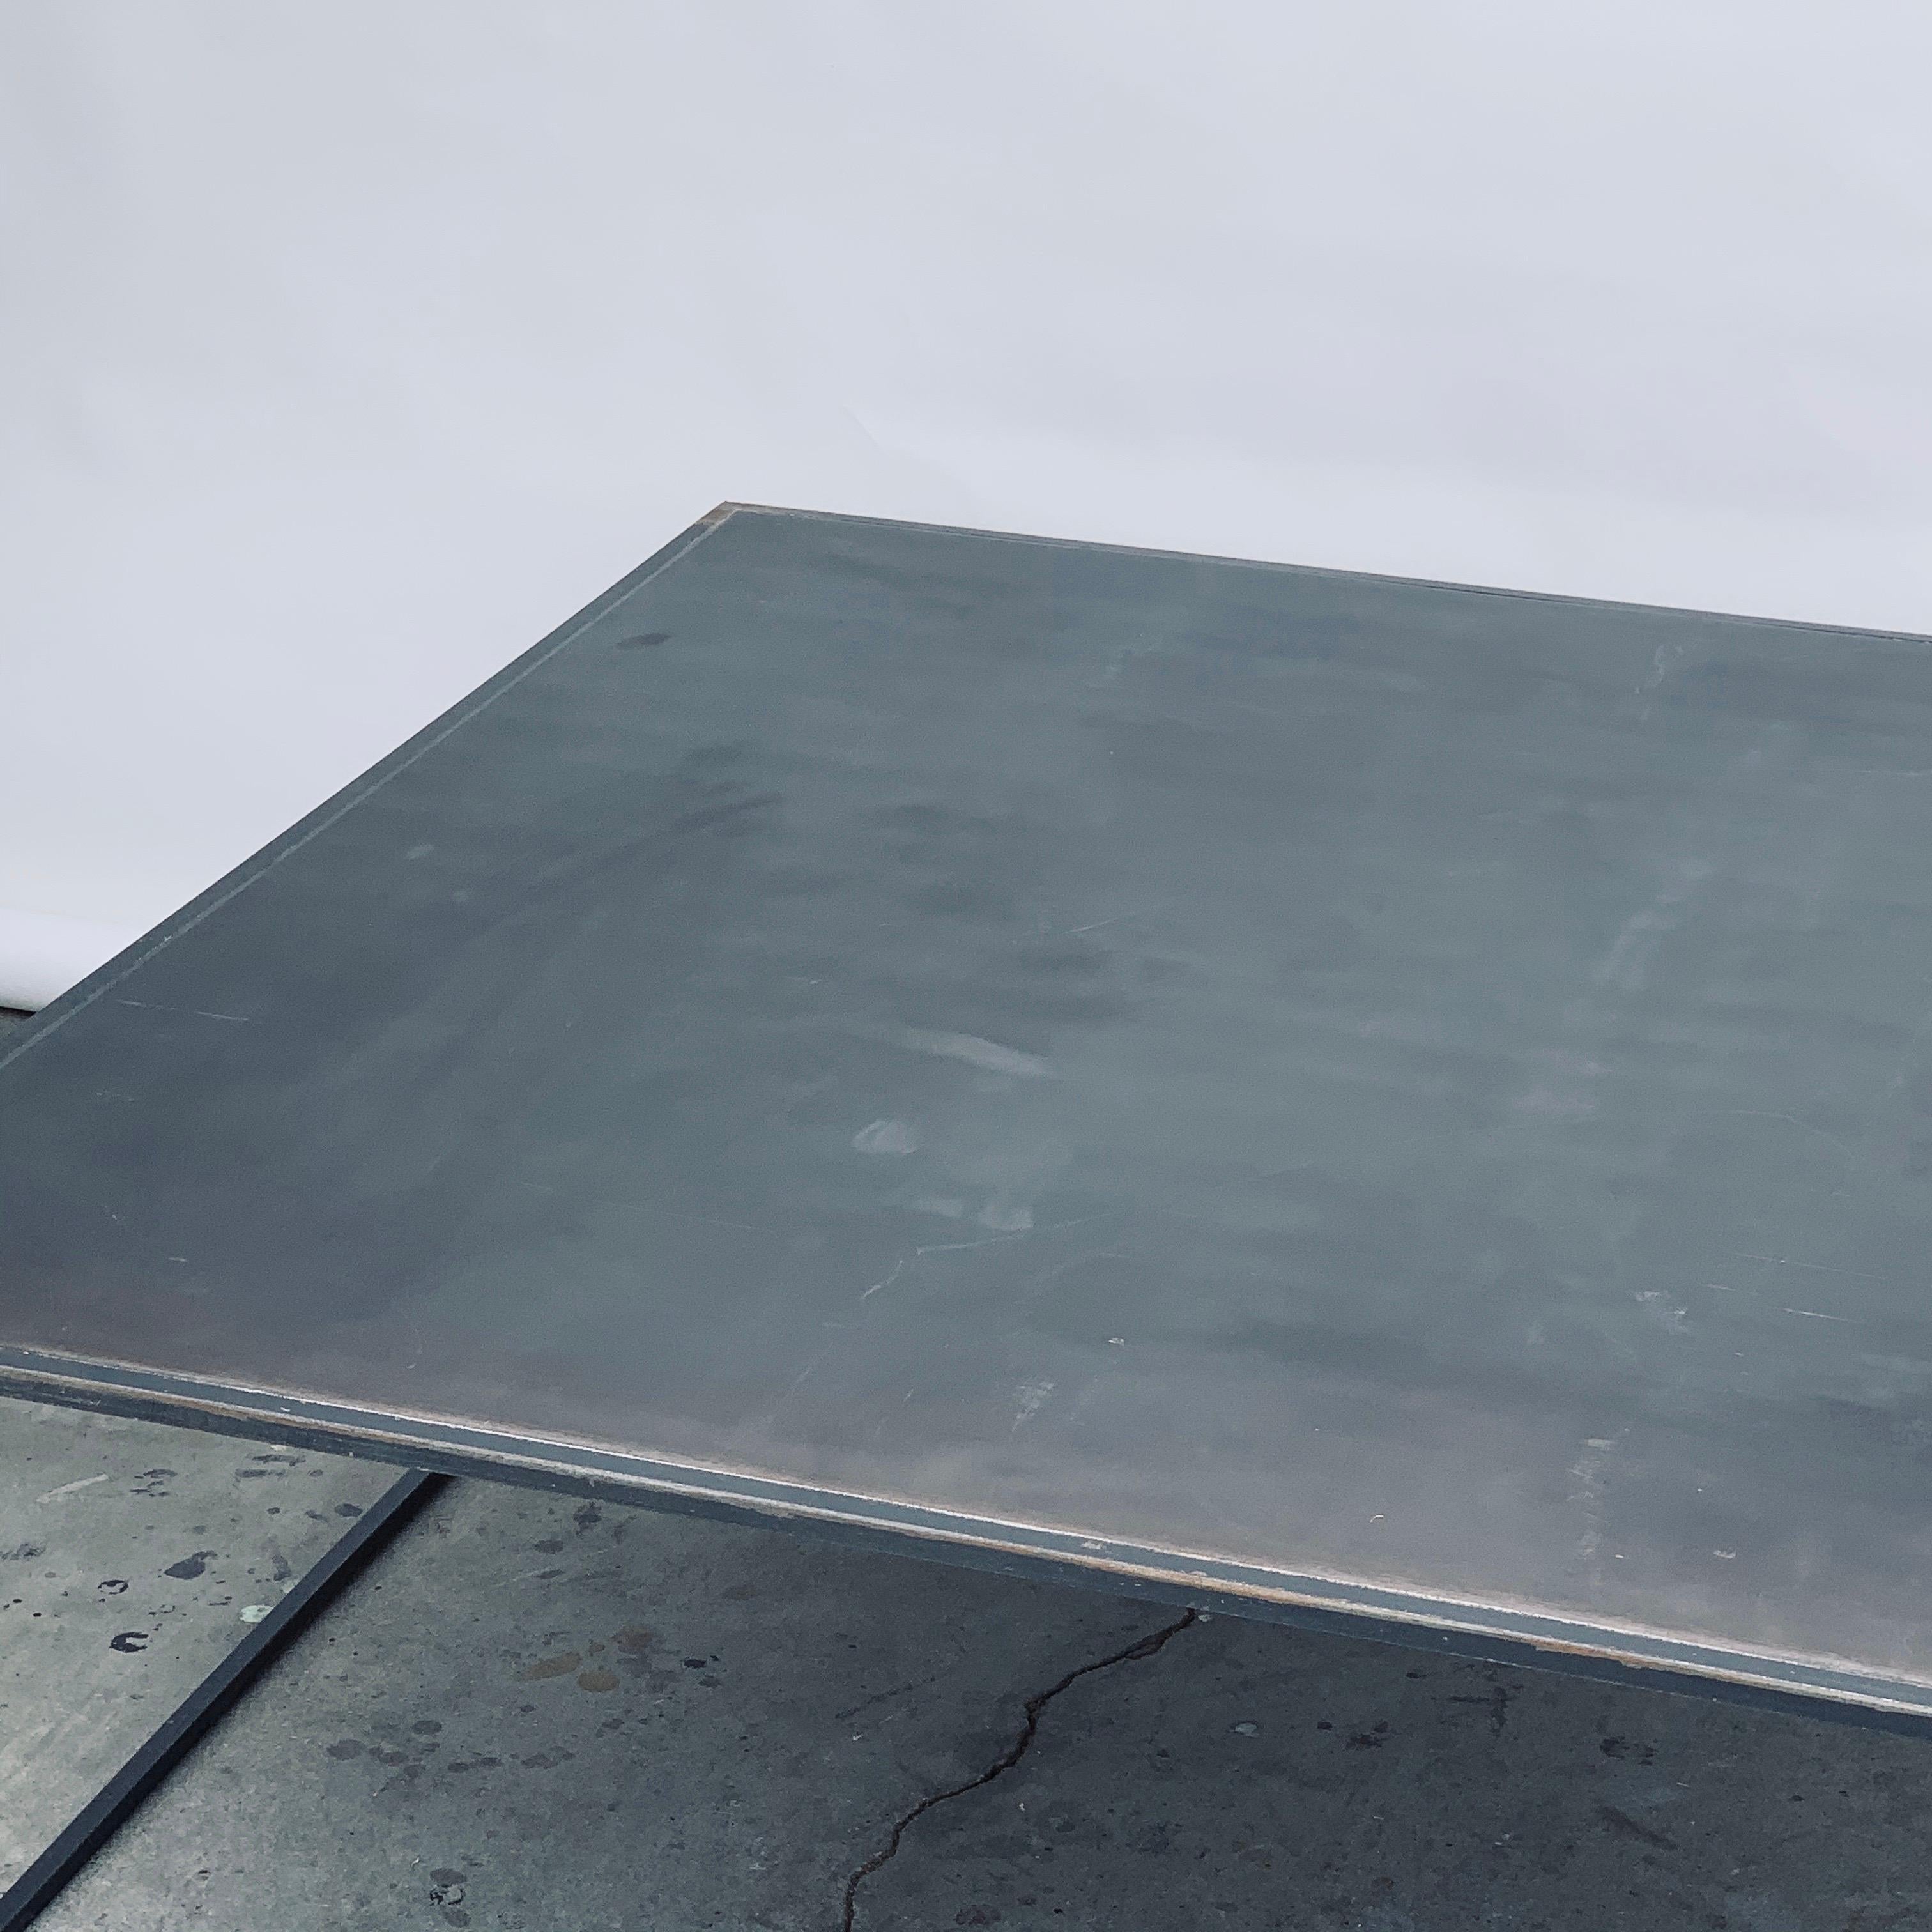 Huge Minimalist 'Filiforme' Patinated Steel Coffee Table by Design Frères In Good Condition For Sale In Los Angeles, CA